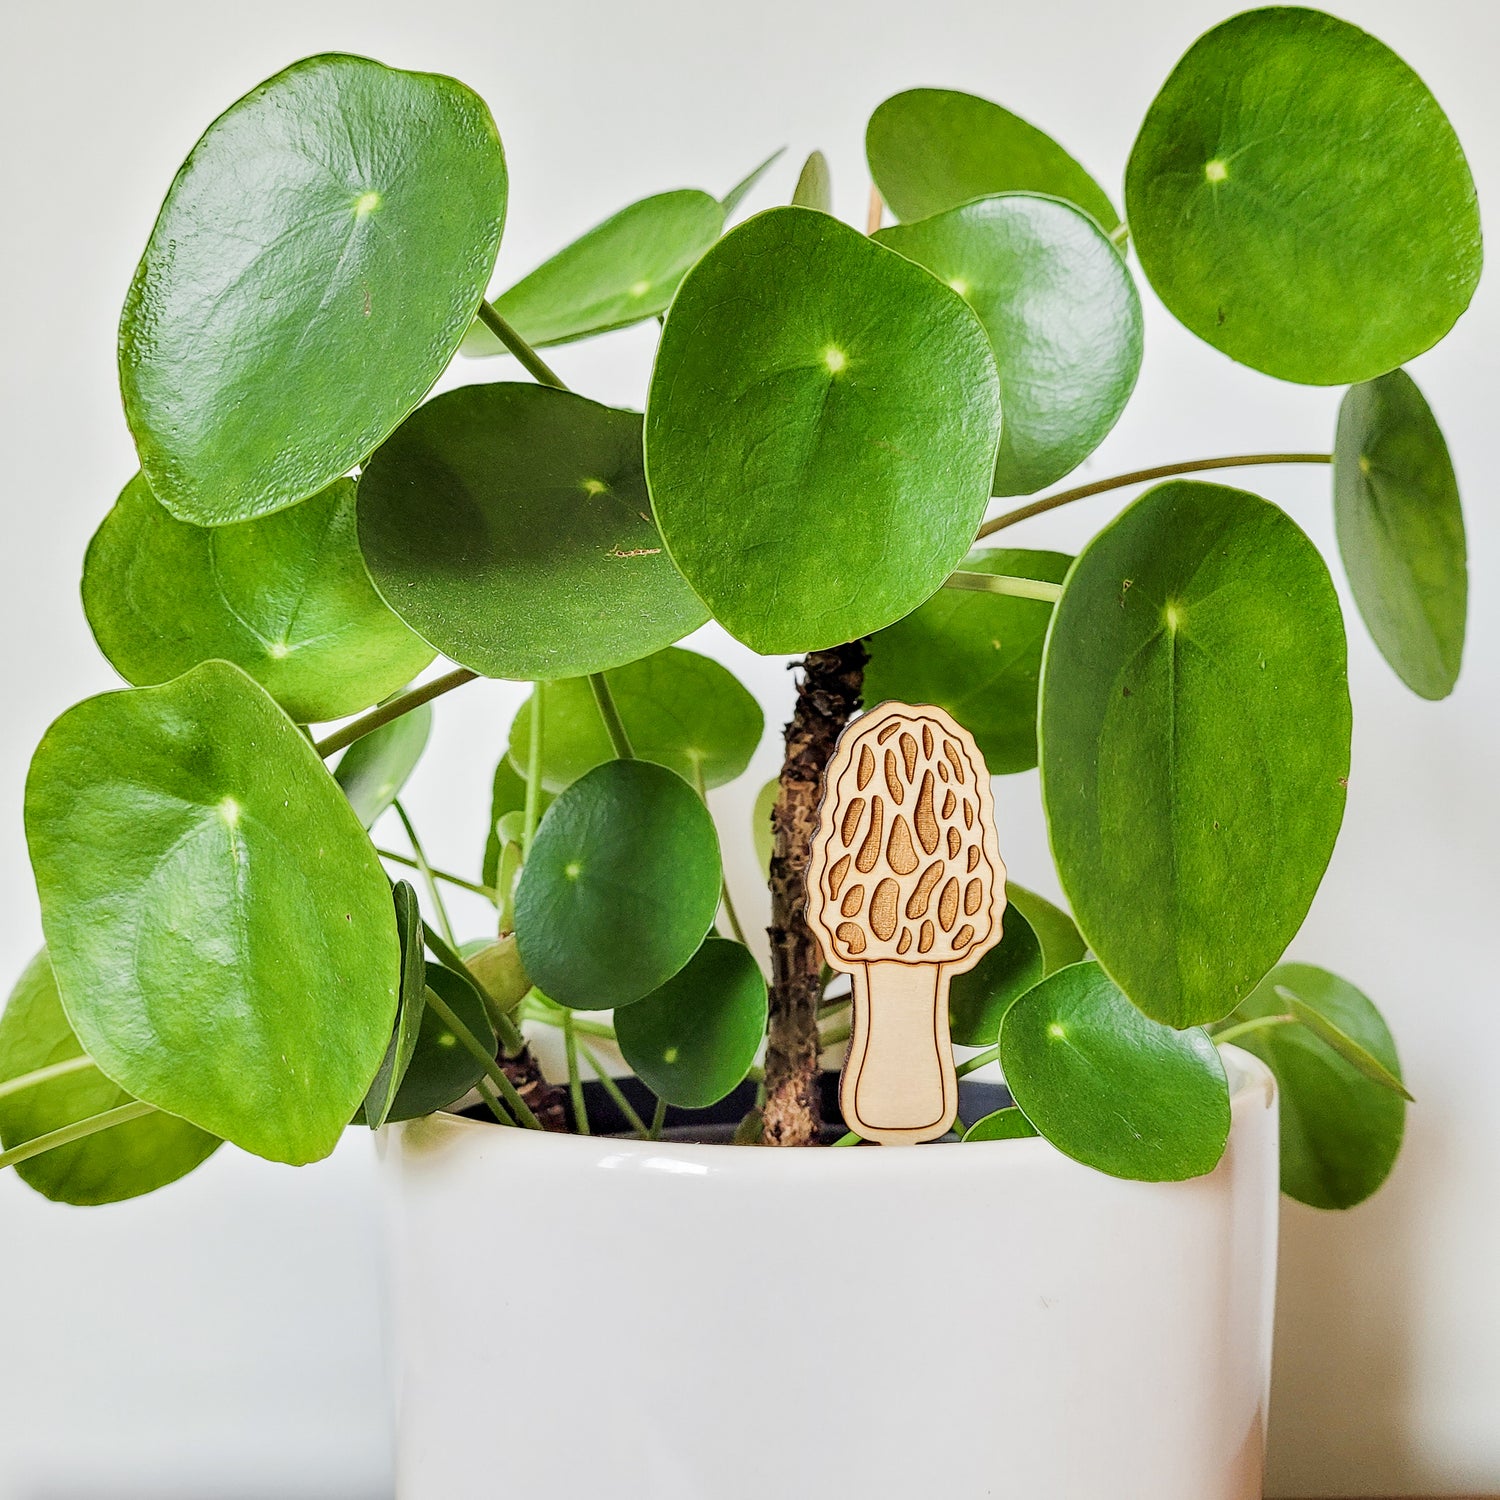 Single standard morel mushroom decorative plant stake displayed in a white 6 inch pot with a pilea plant.